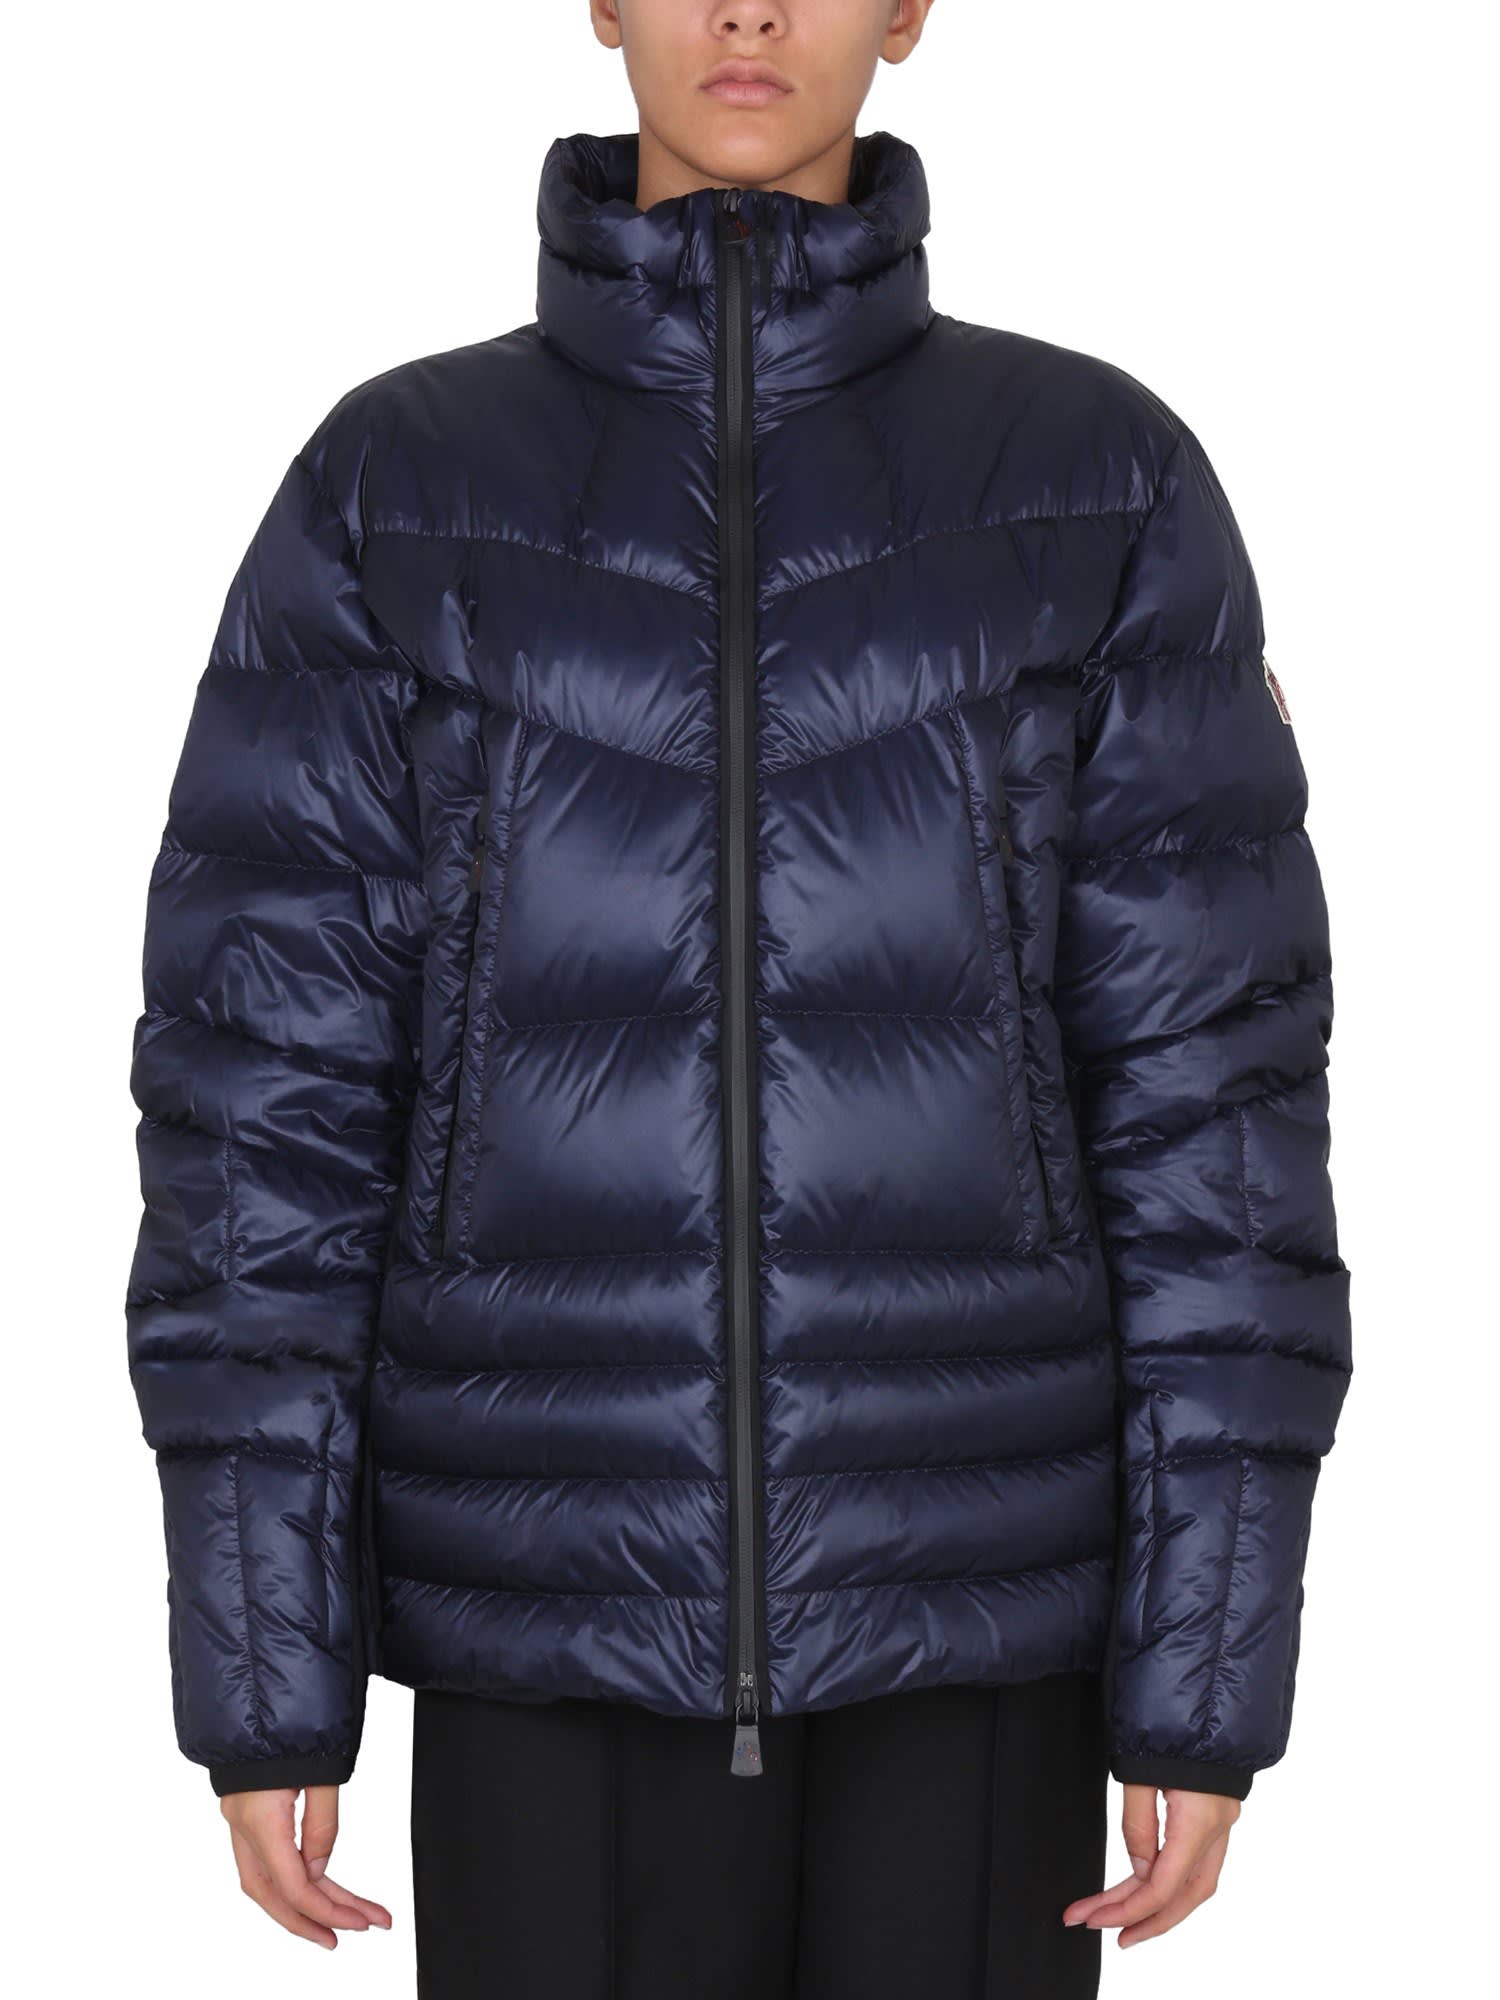 Canmore Jacket